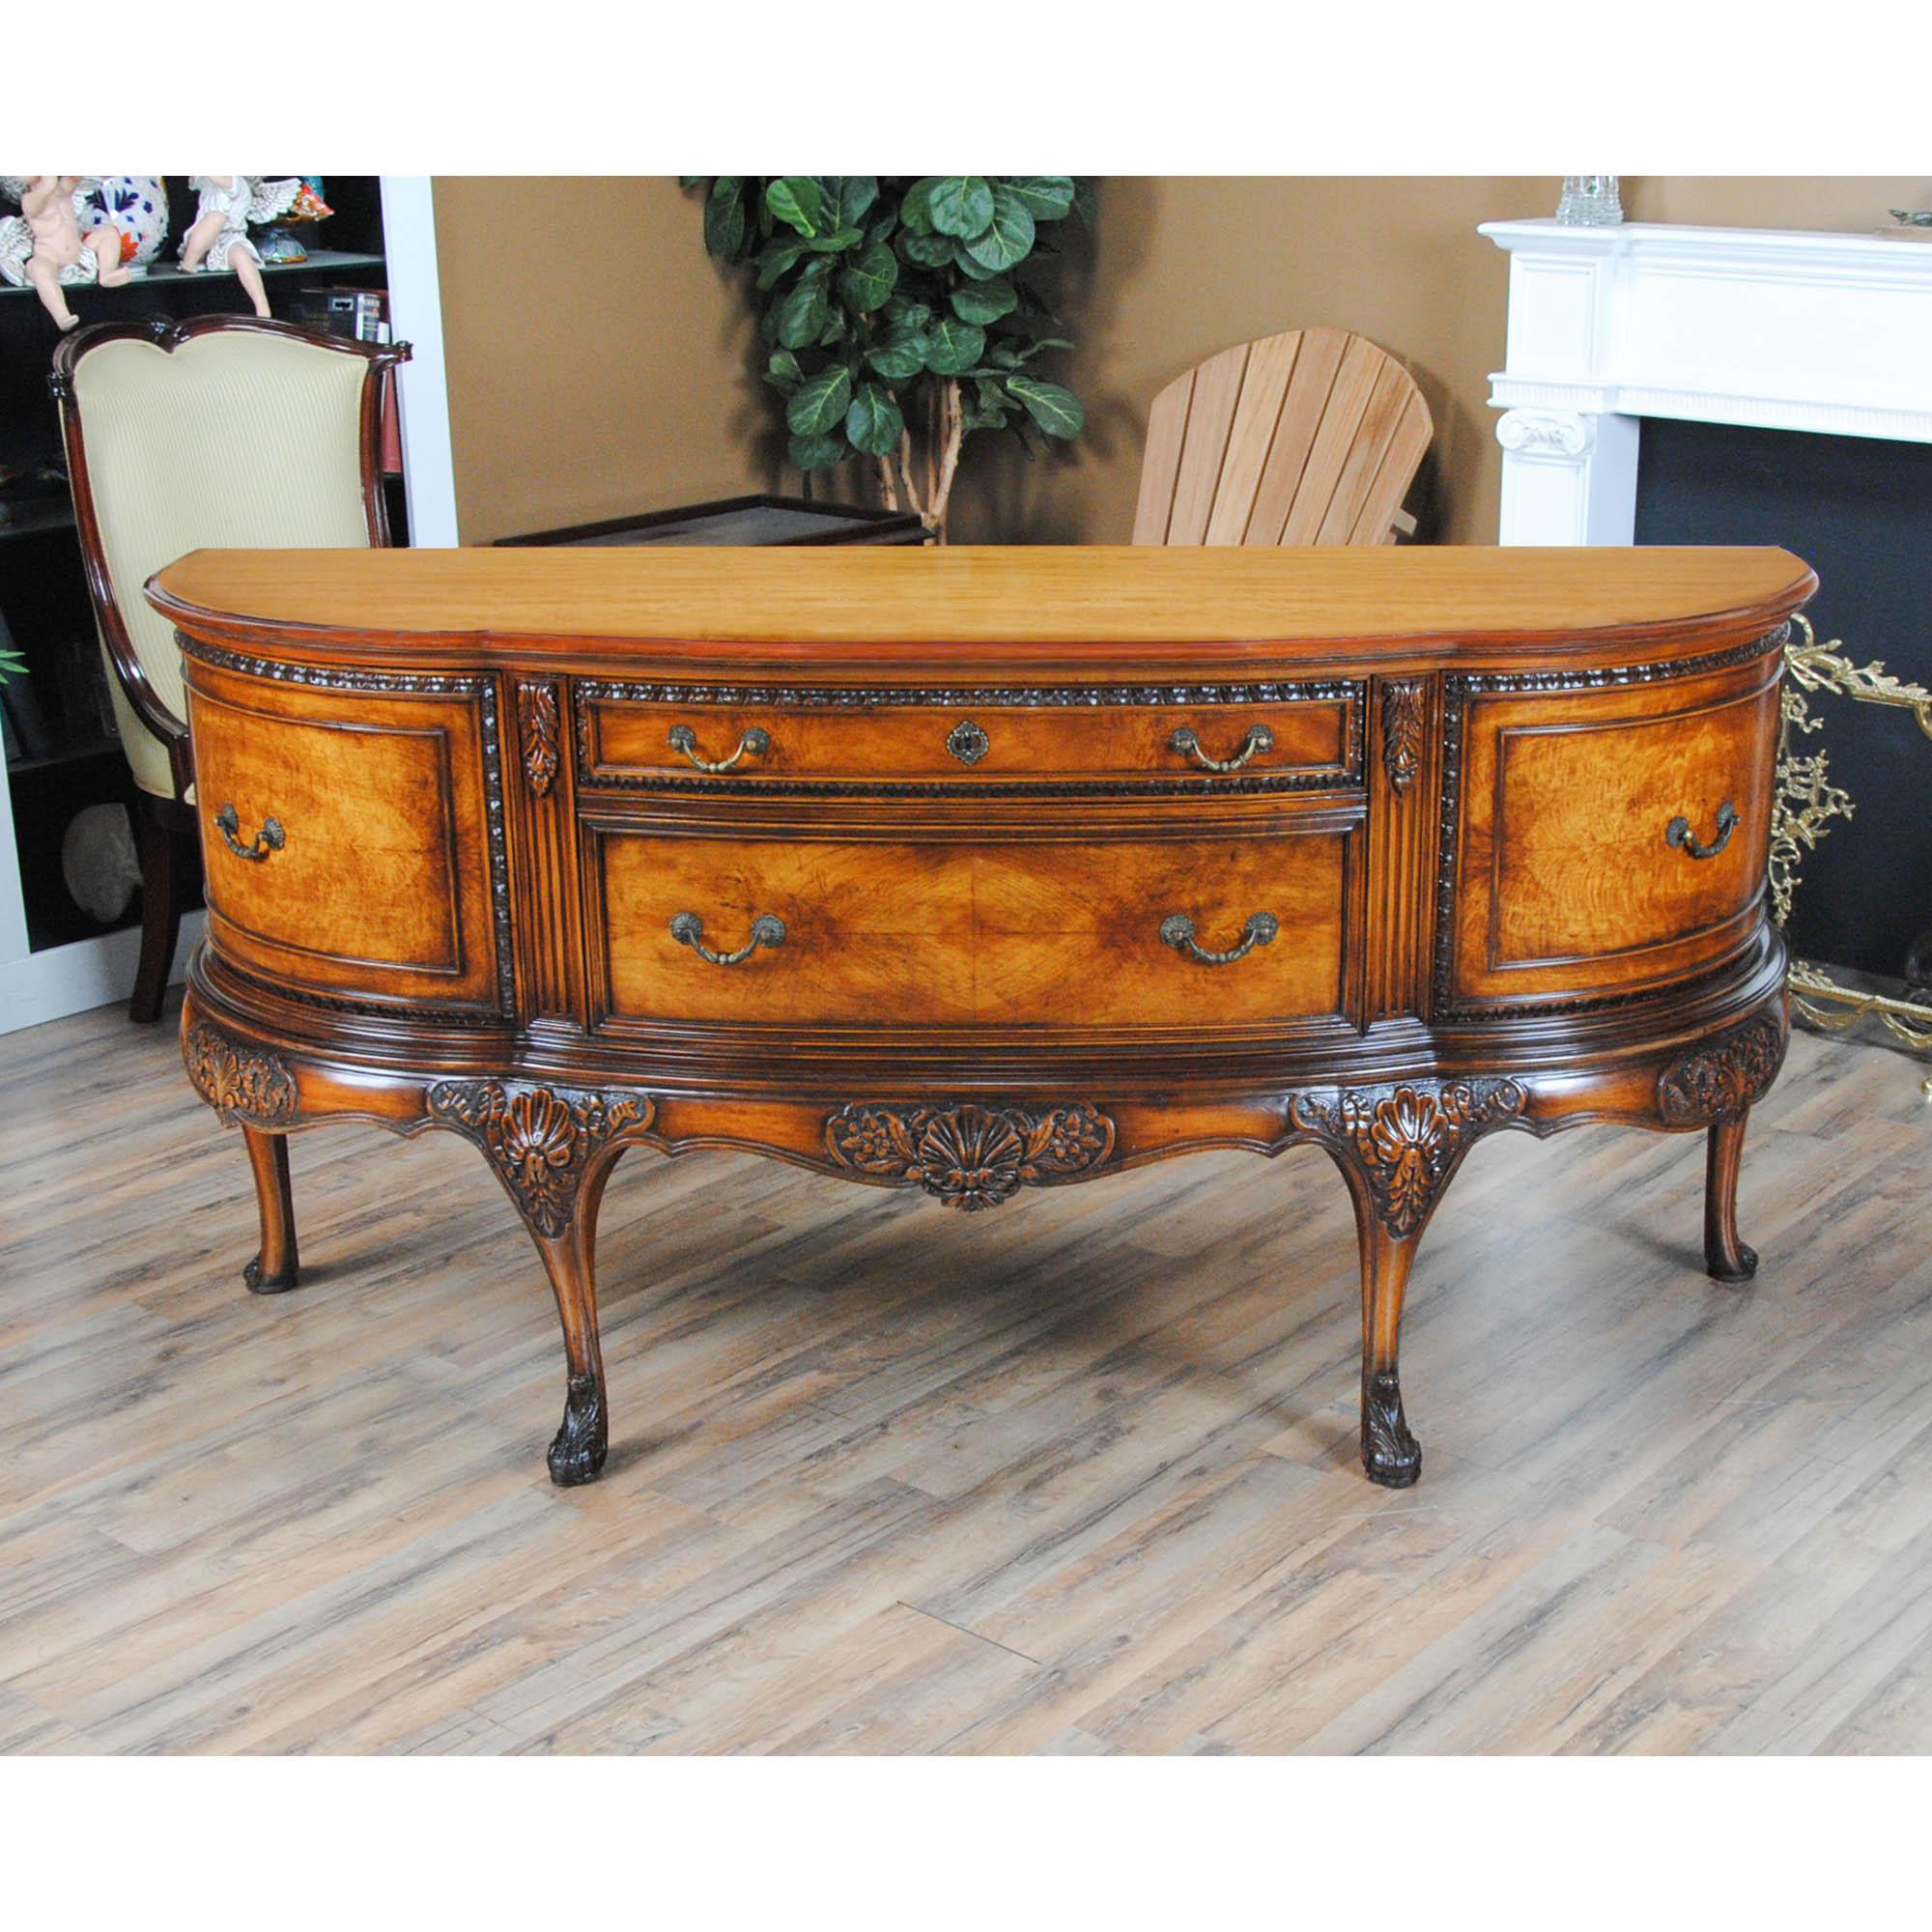 A vintage Berkey and Gay demilune Sideboard in excellent condition. The top has recently been French polished to give it a straight from the factory appearance.

Both large and incredibly detailed this beautiful Berkey and Gay demilune Sideboard